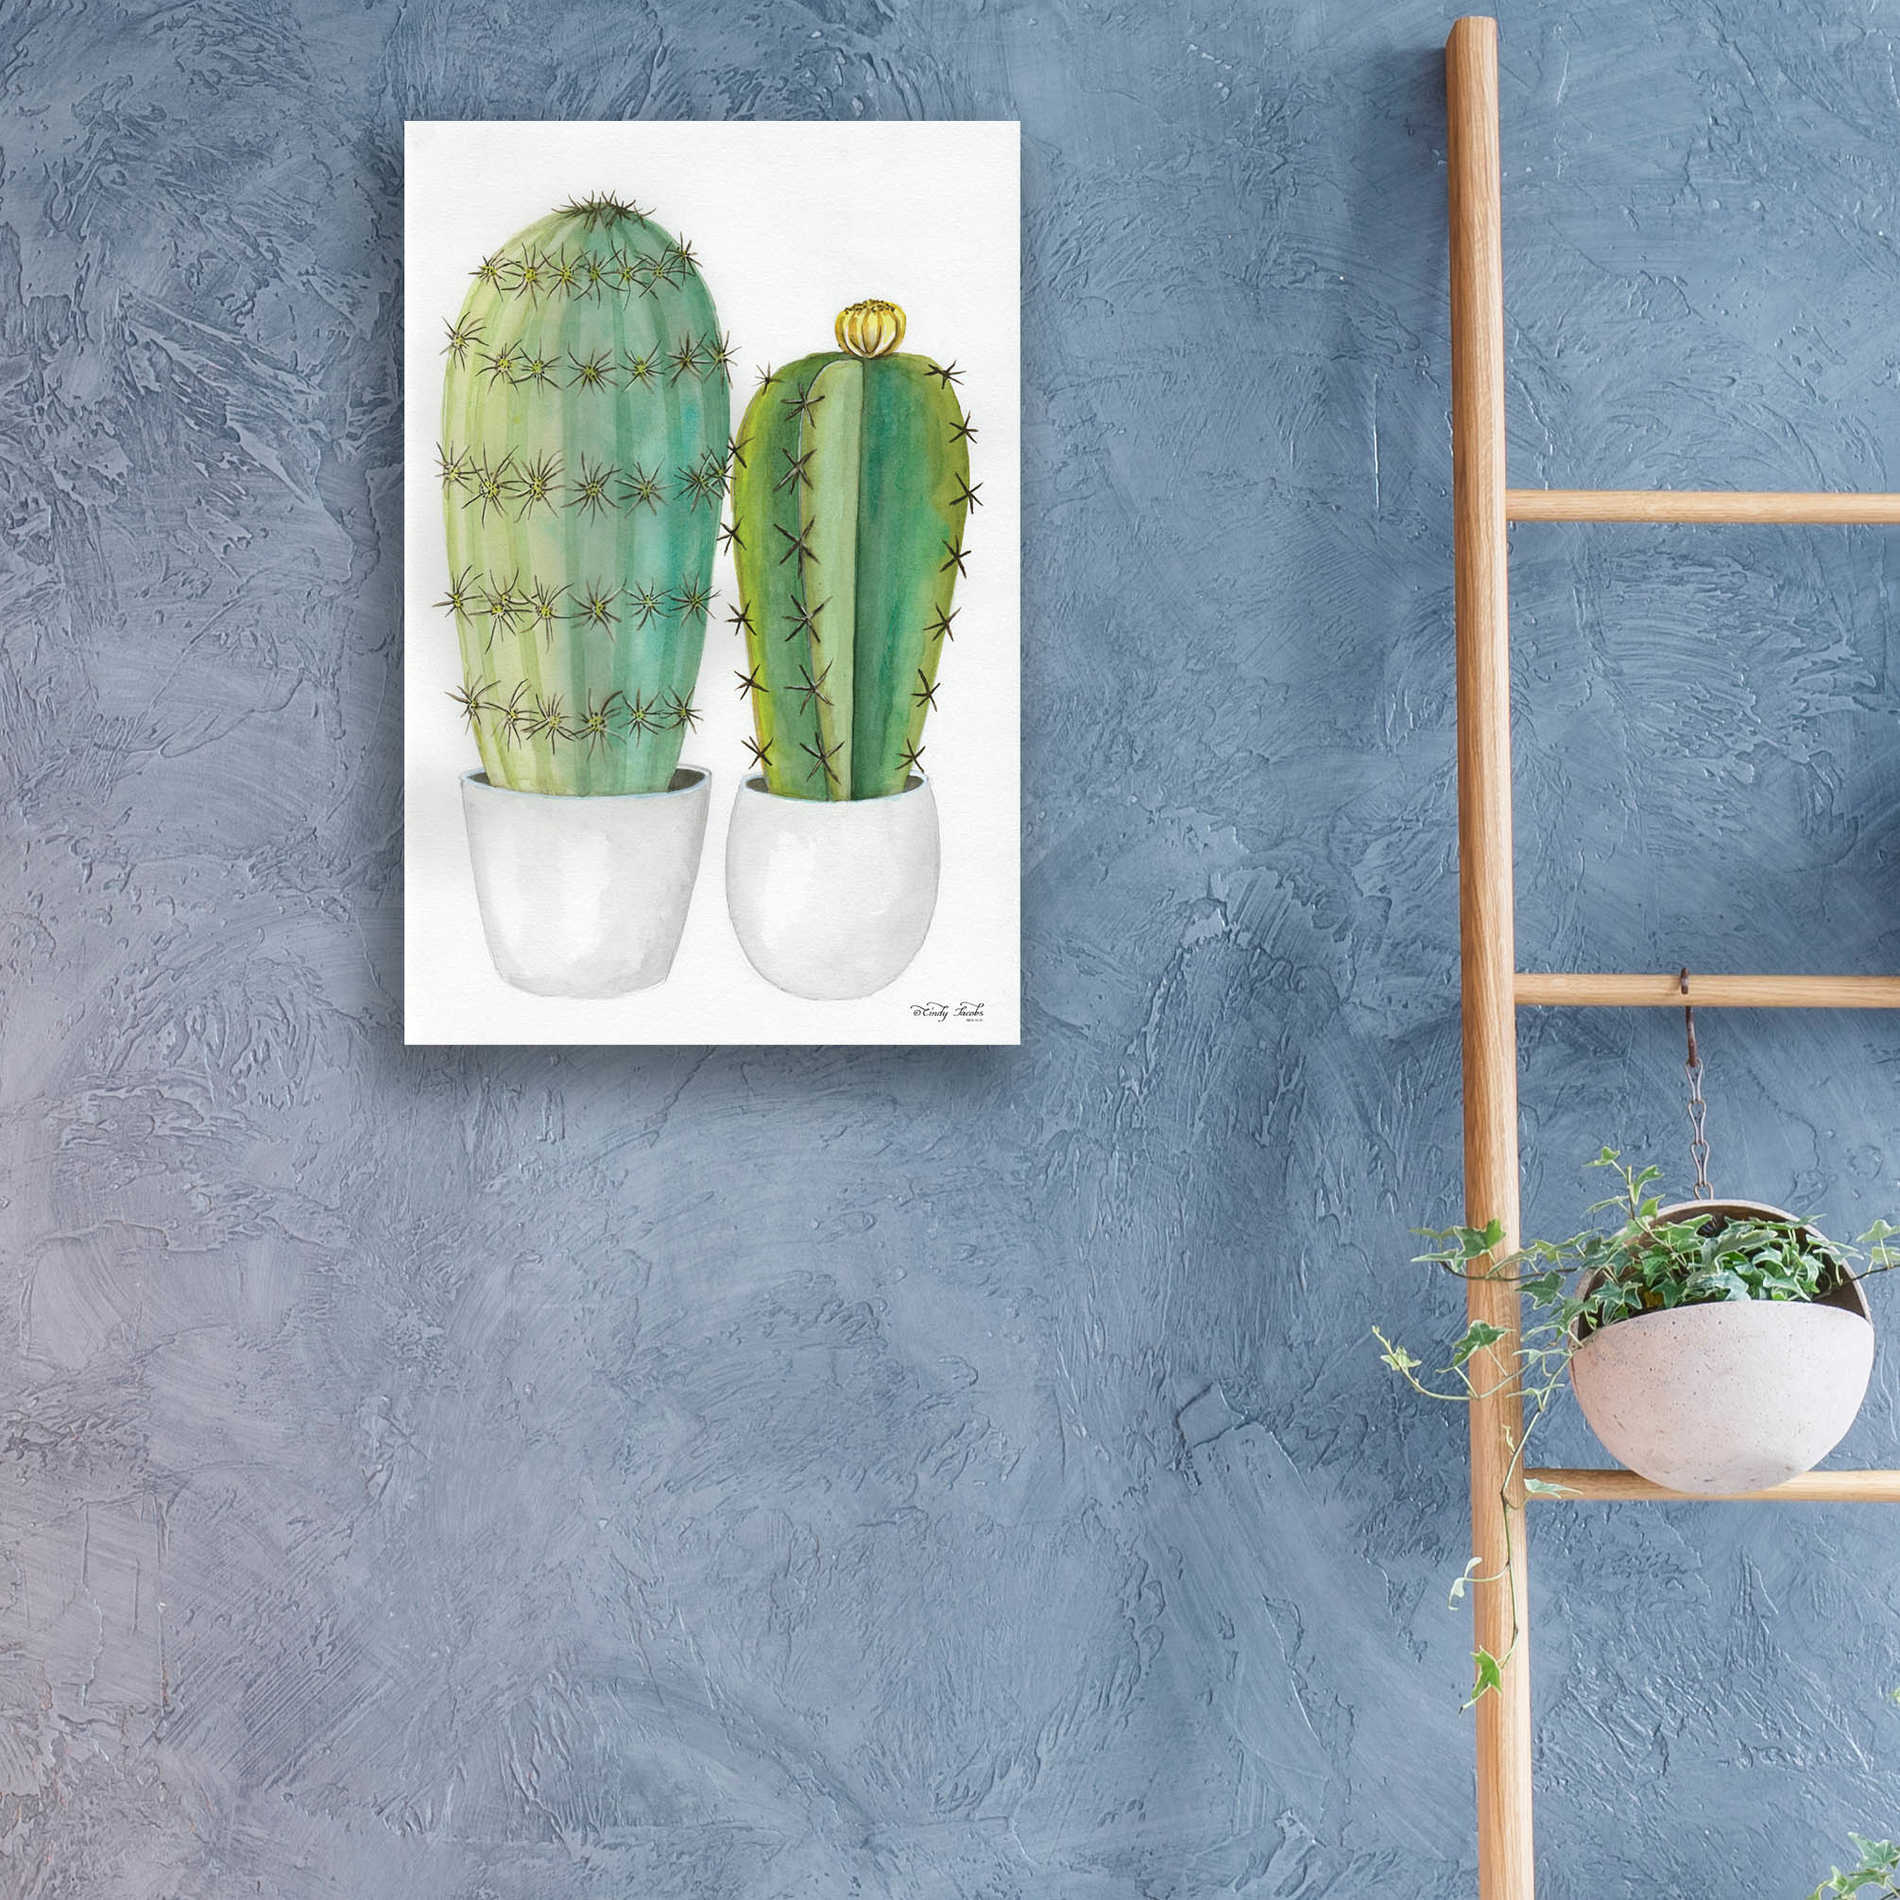 Epic Art 'Cactus Love' by Cindy Jacobs, Acrylic Glass Wall Art,16x24